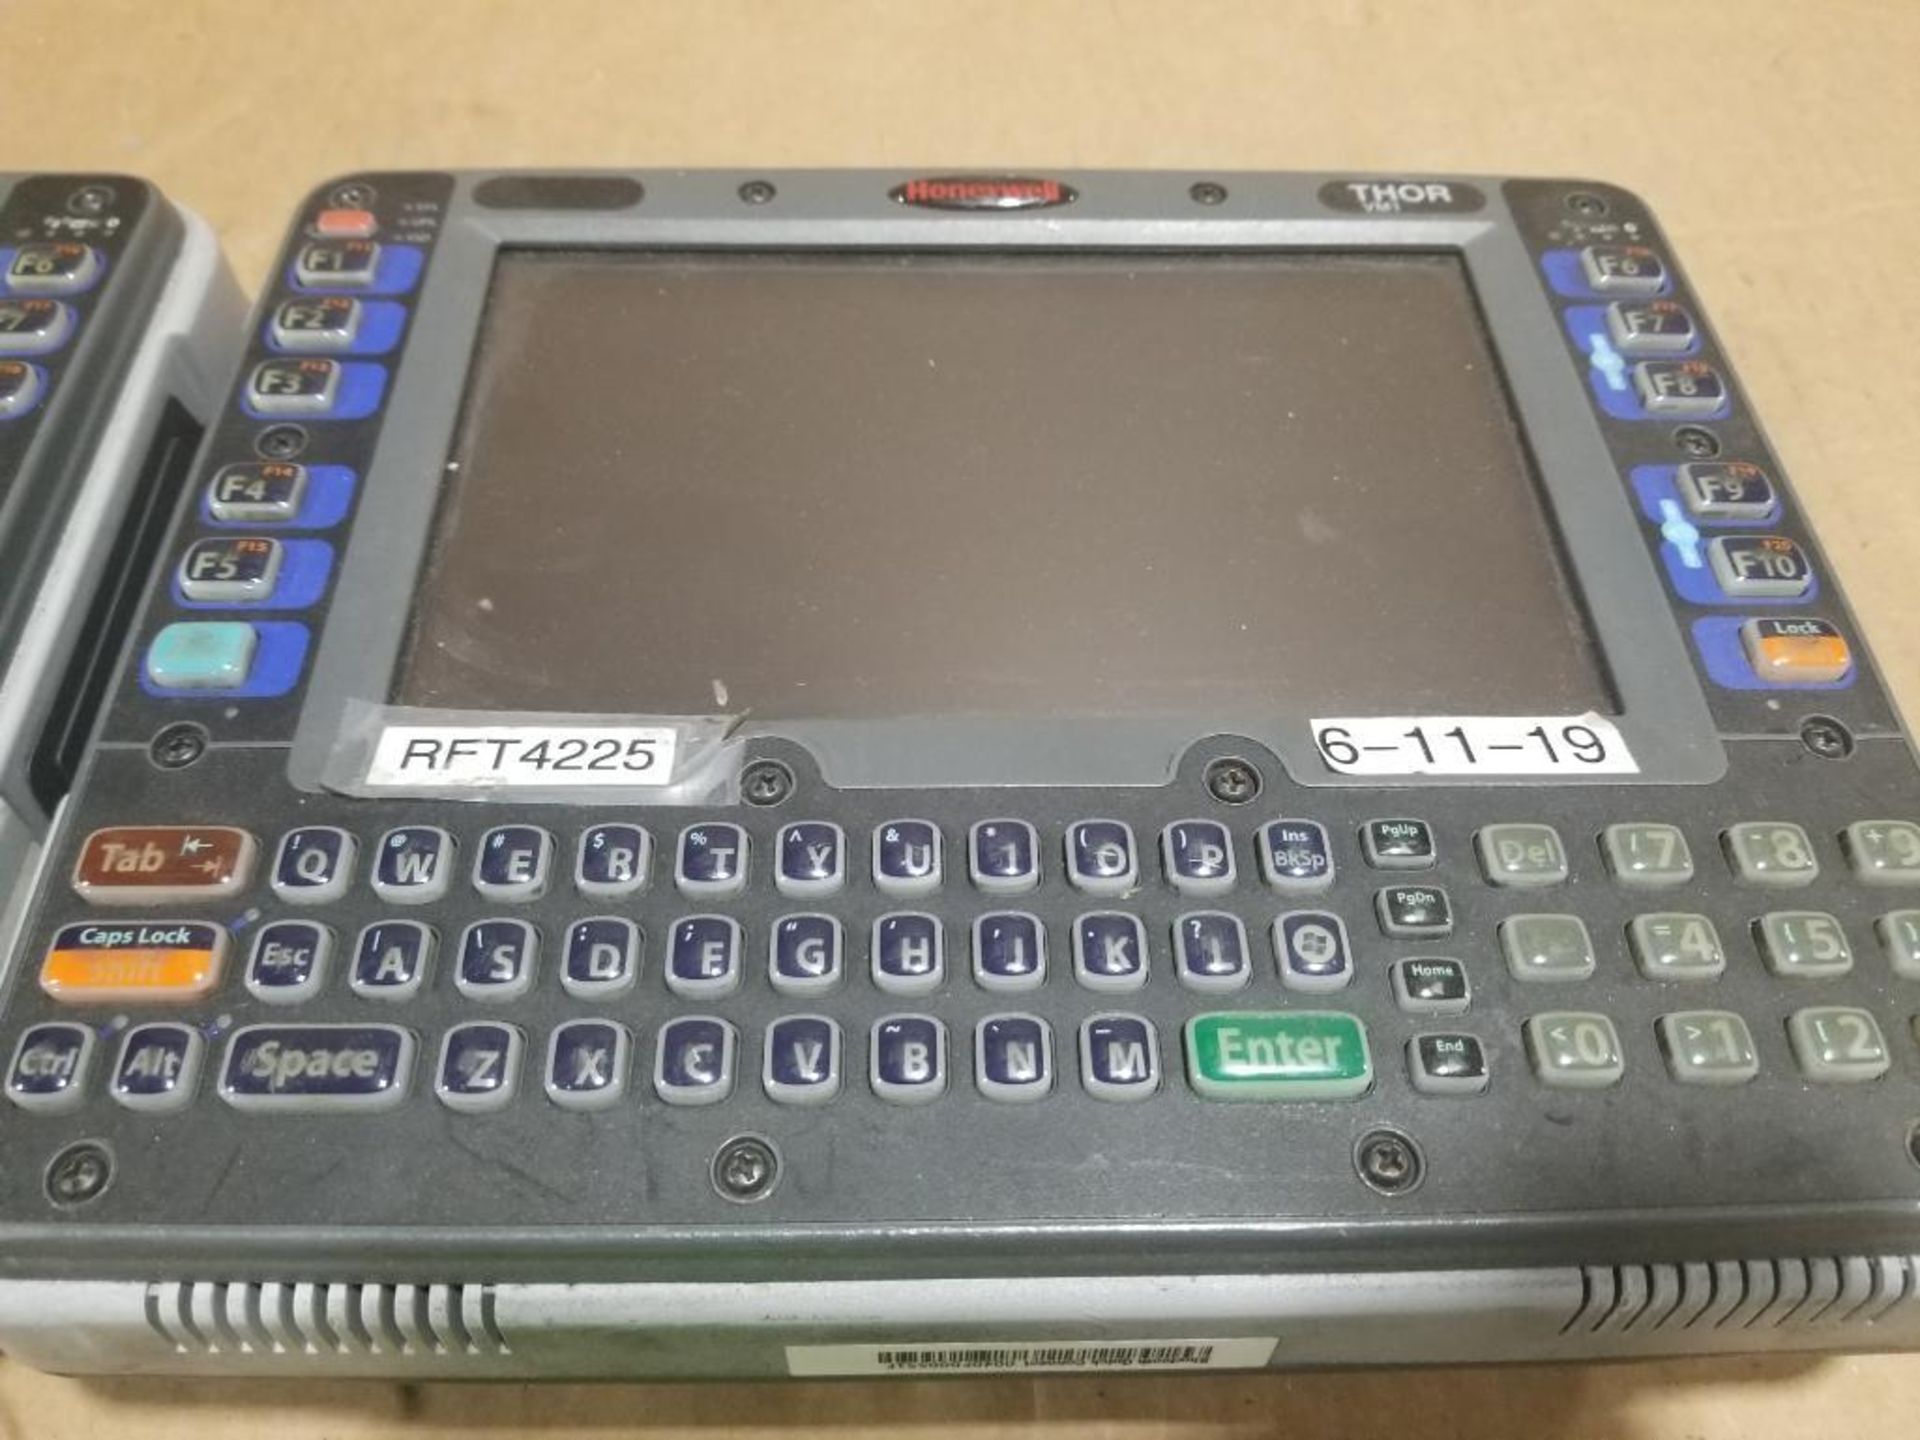 Qty 2 - Honeywell mobile computers. Model Thor VM1. - Image 2 of 5